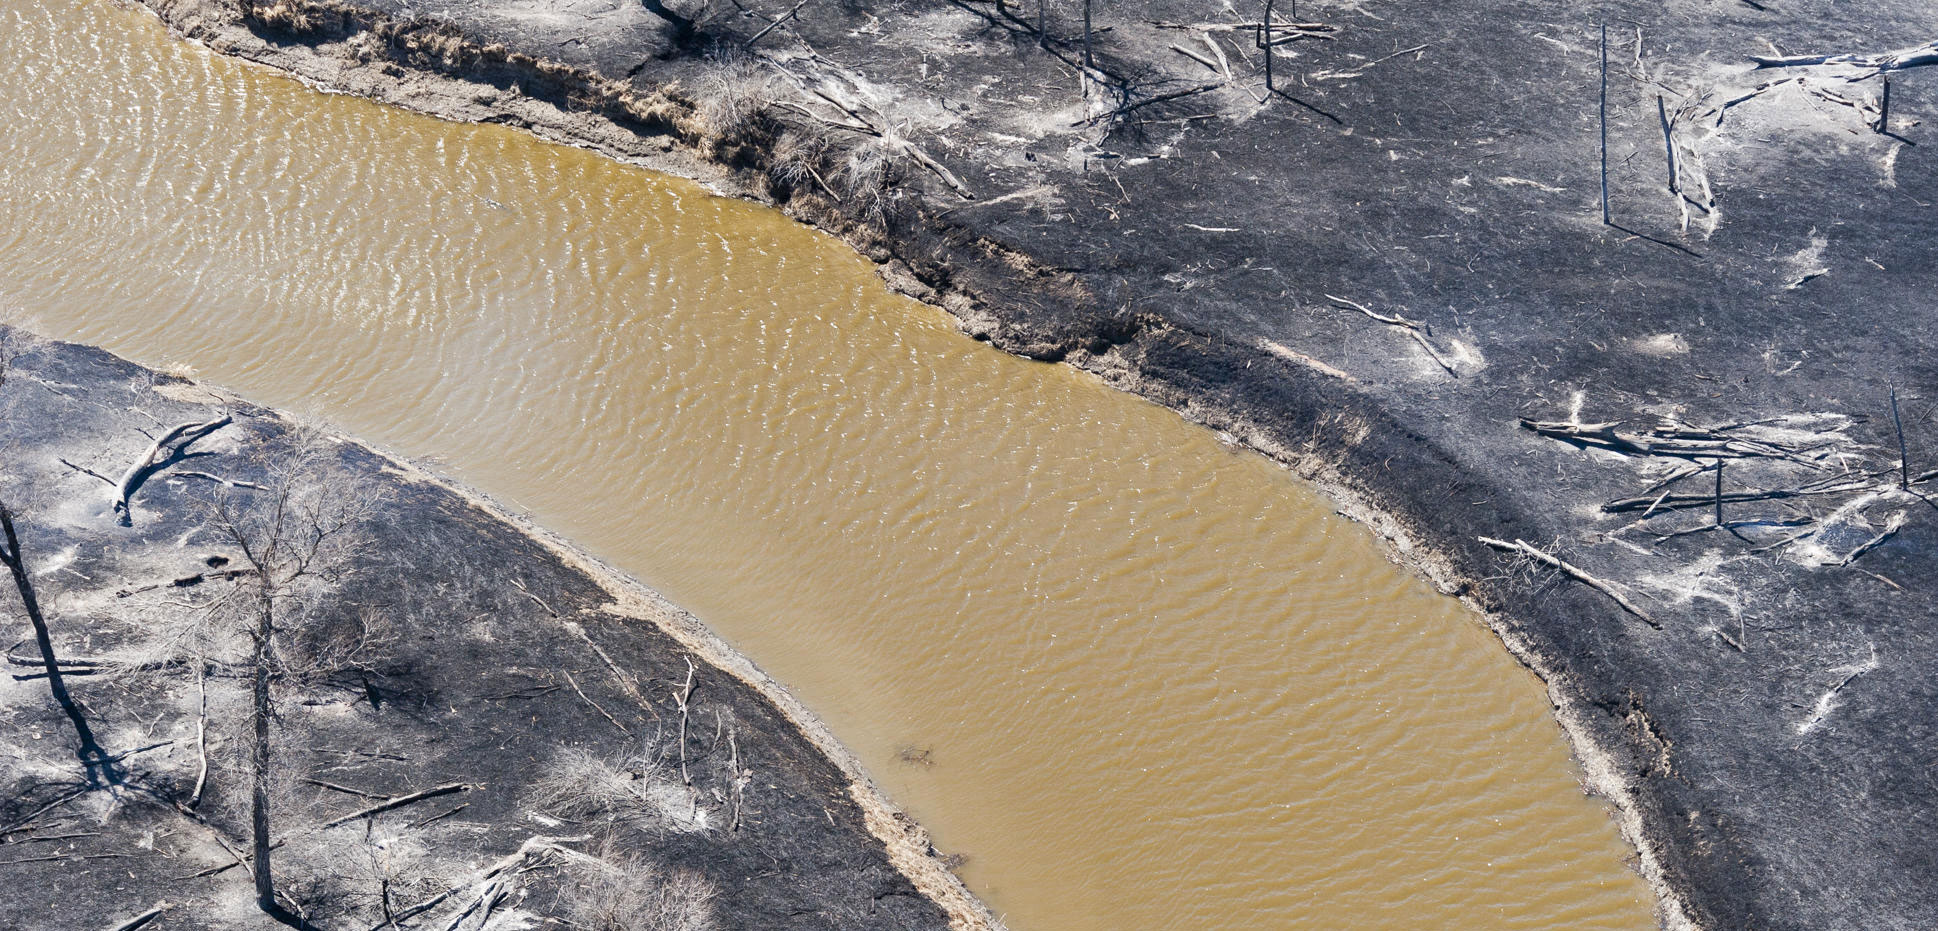 muddy river surrounded by charred aftermath of a wildfire